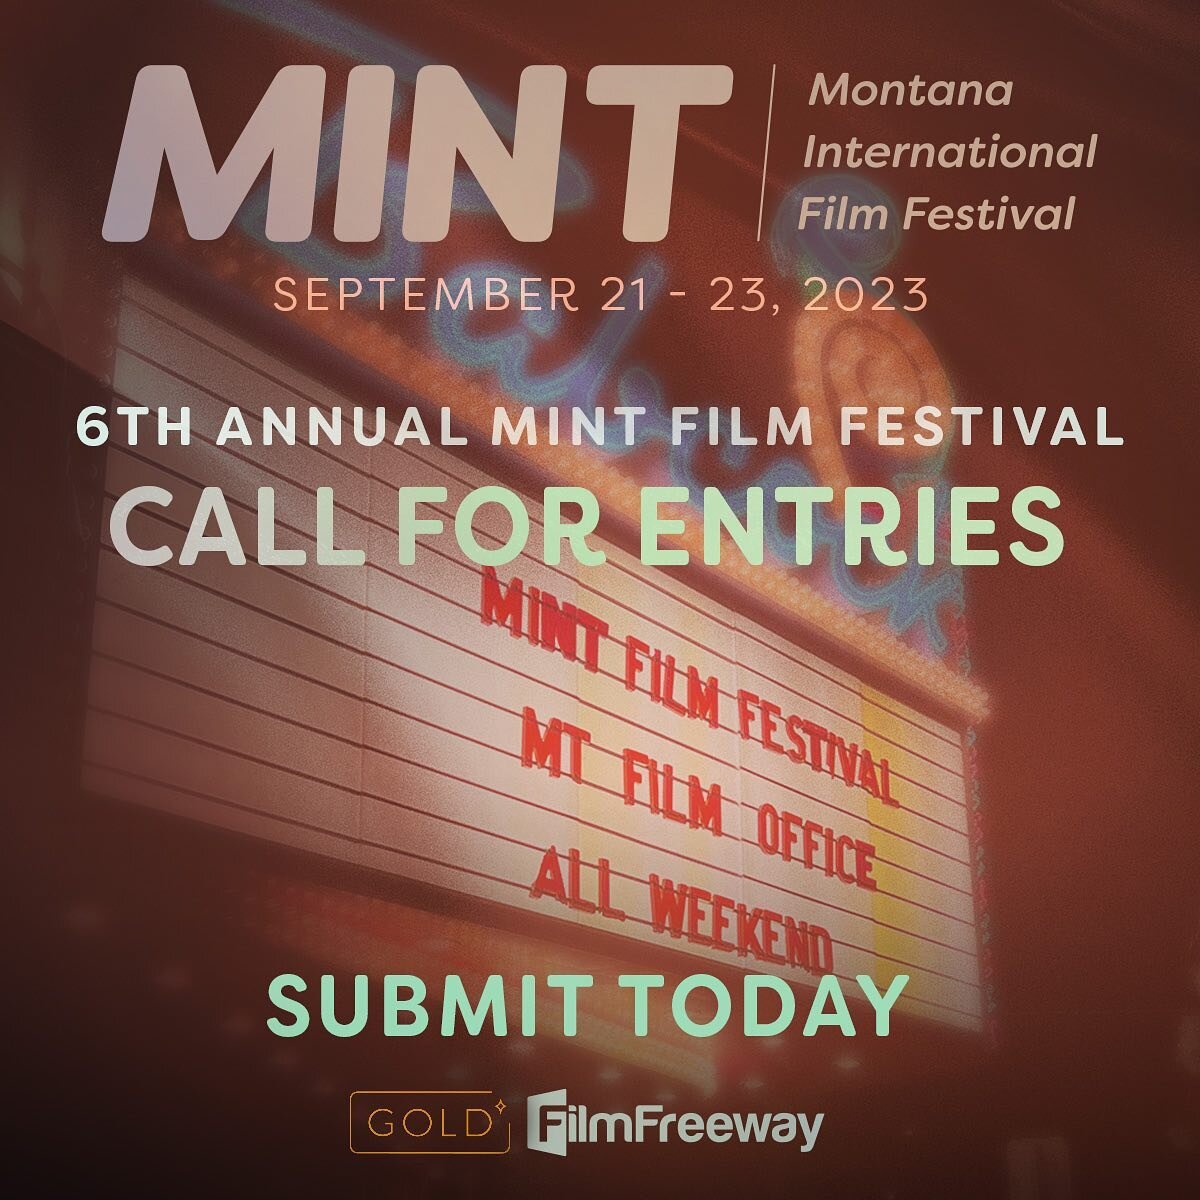 Calling all creative and boundary-pushing filmmakers&mdash;Submissions are now open for the 6th annual @mint_film_festival! Submit your narrative, documentary, short, experimental, or new media film today on @filmfreeway. @montanafilmoffice406 

#fil